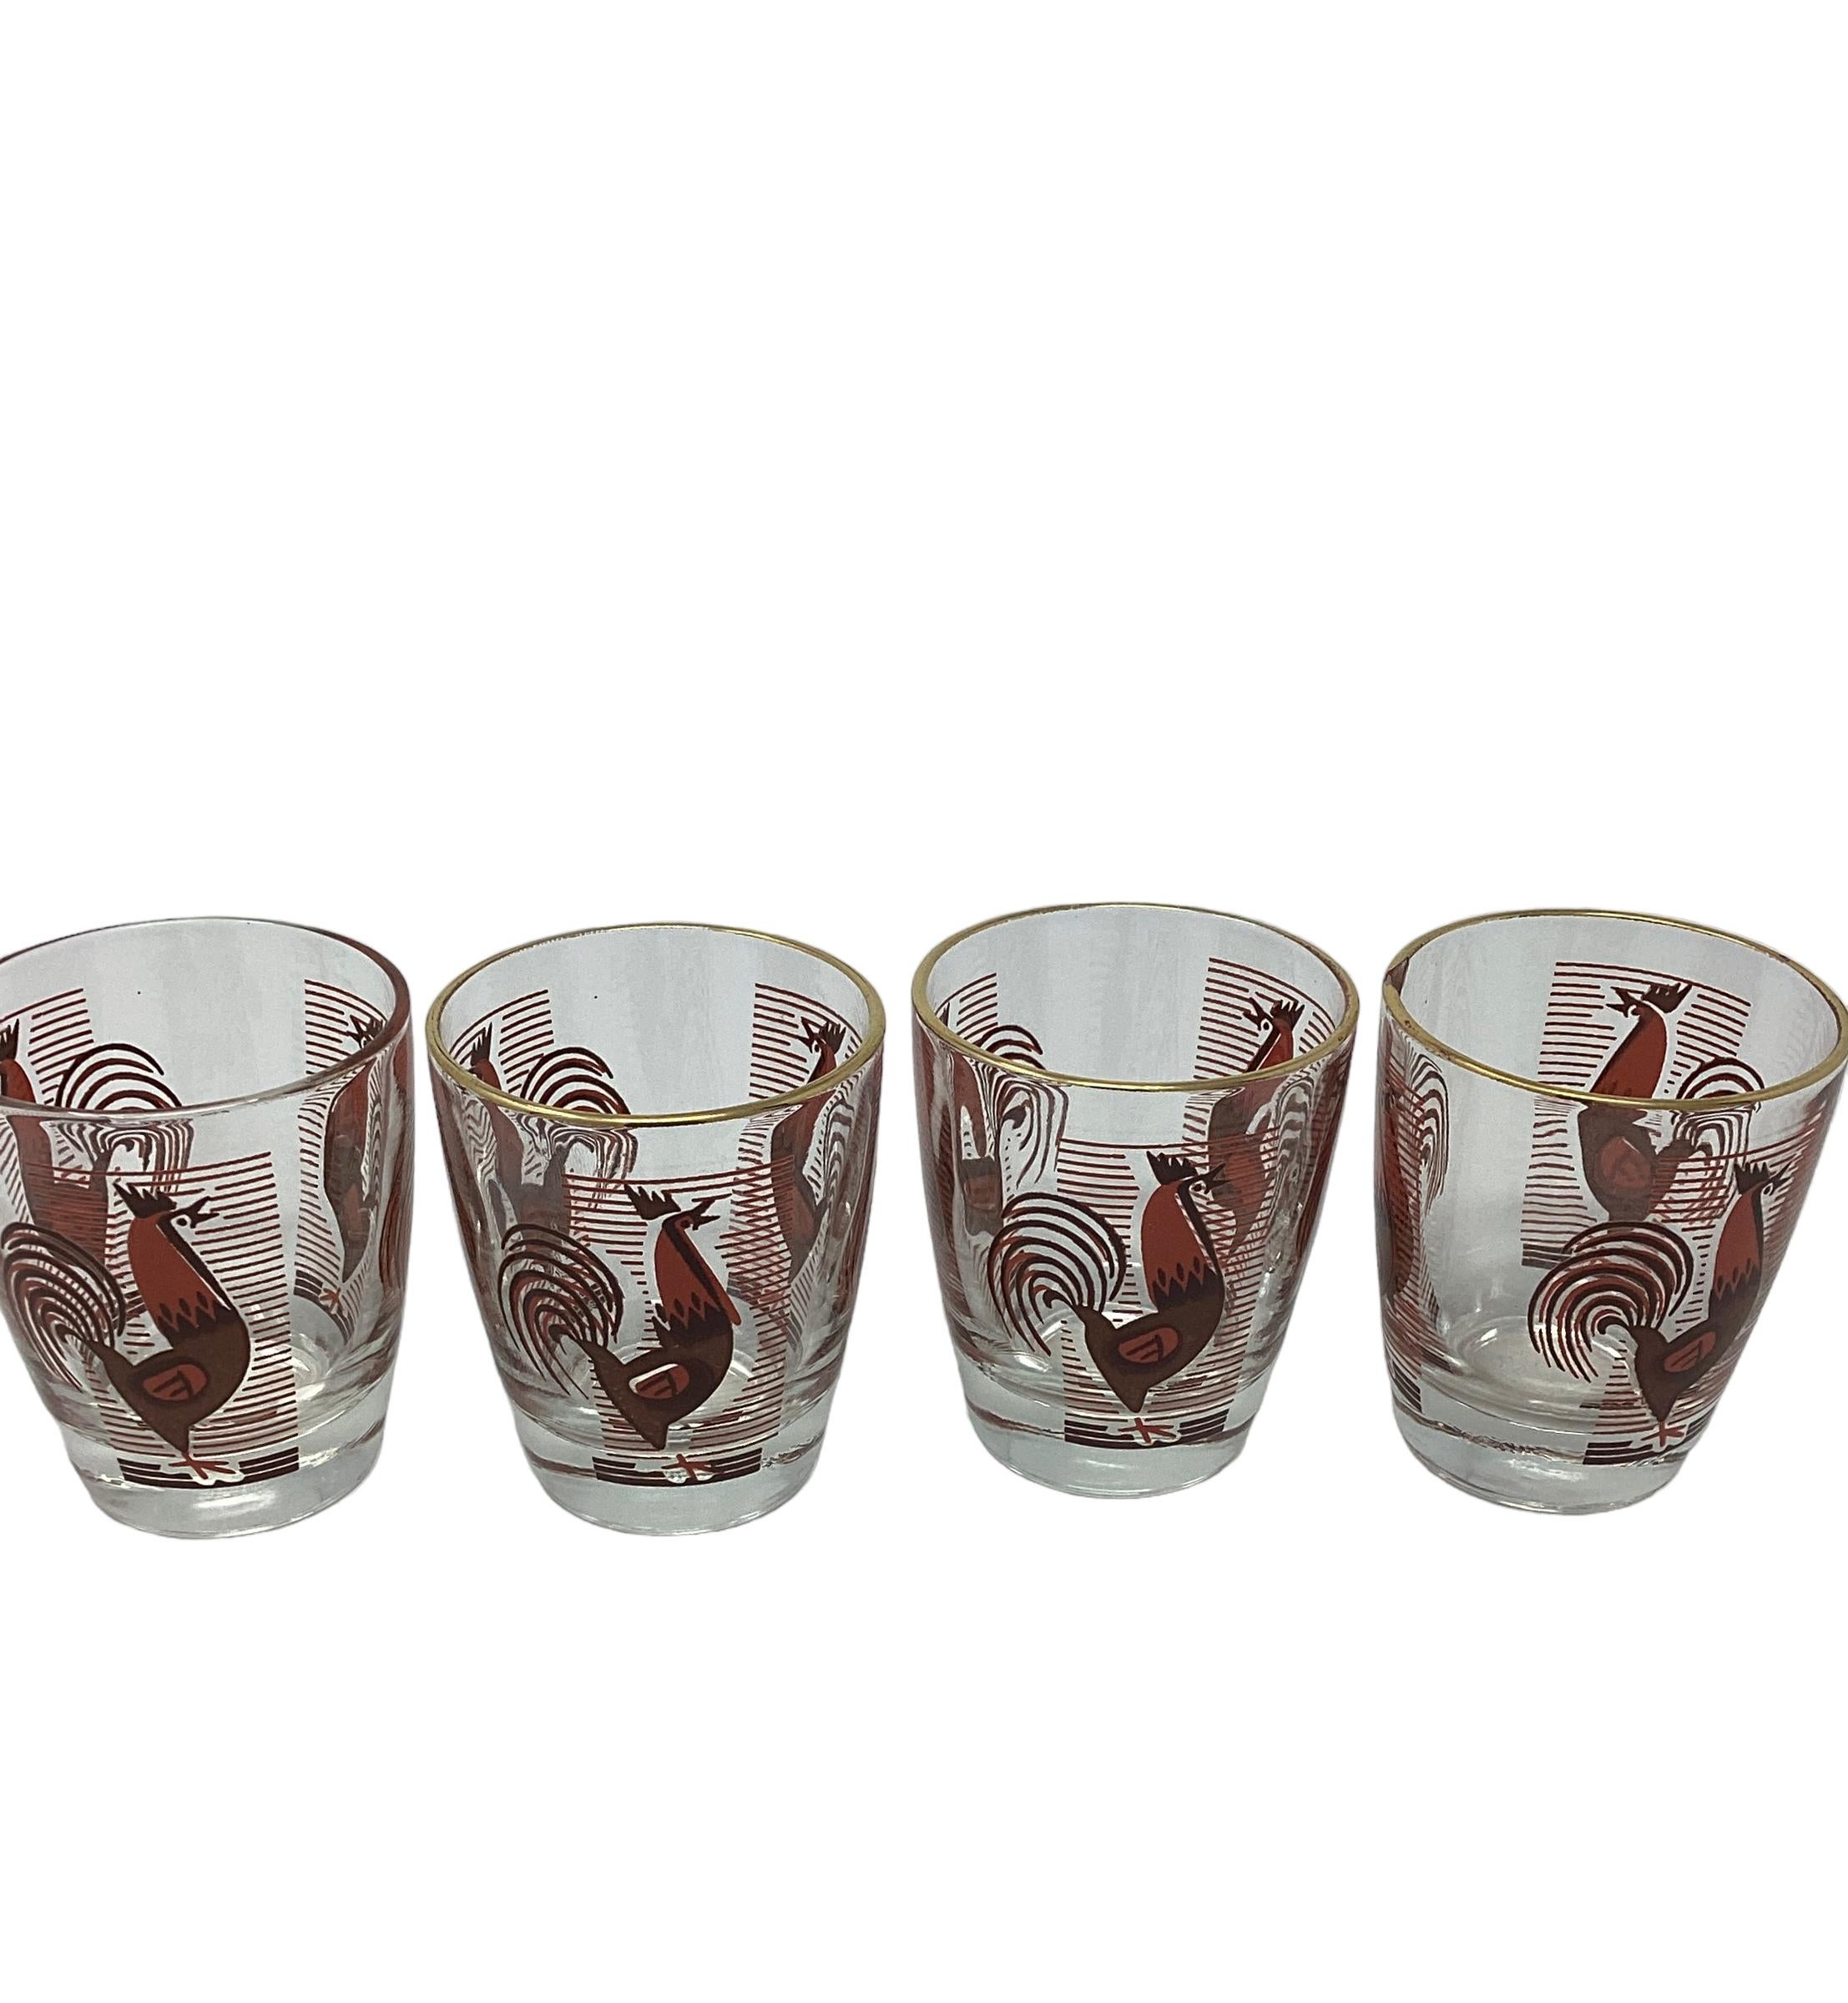 Vintage Art Deco 5 Piece Dyball Cocktail Set with Stylized Rooster For Sale 3